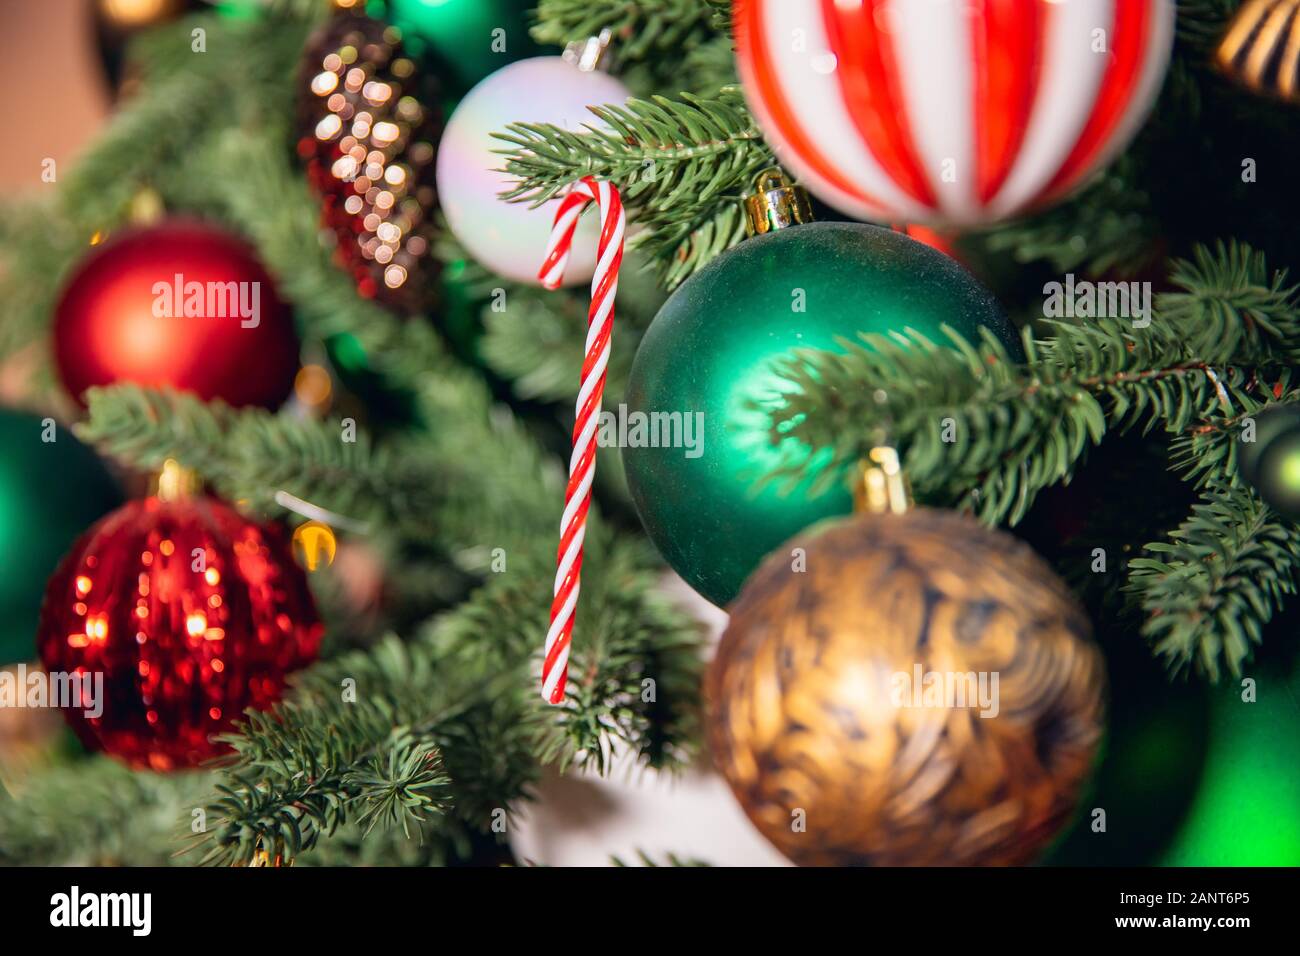 Christmas background tree branch with decorations candy lollipop cane ...